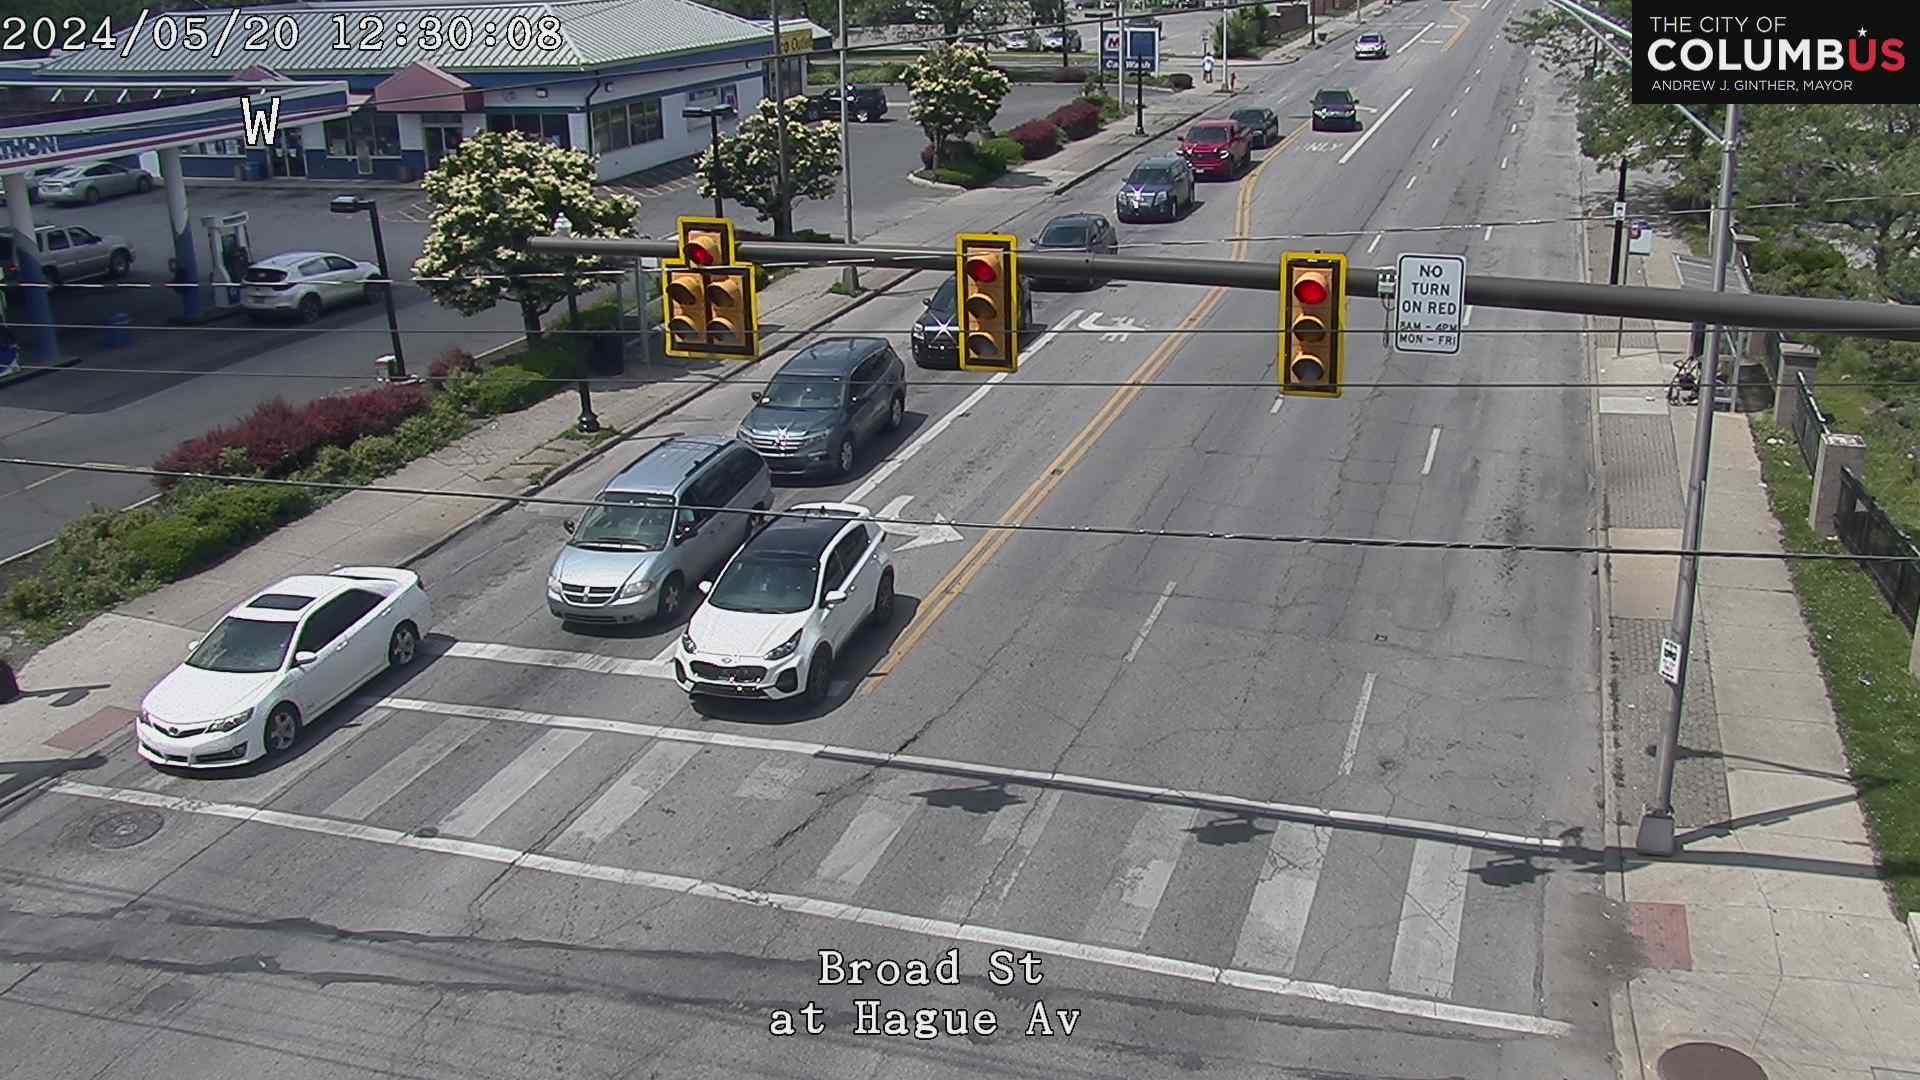 Traffic Cam Columbus: City of - Broad St at Hague Ave